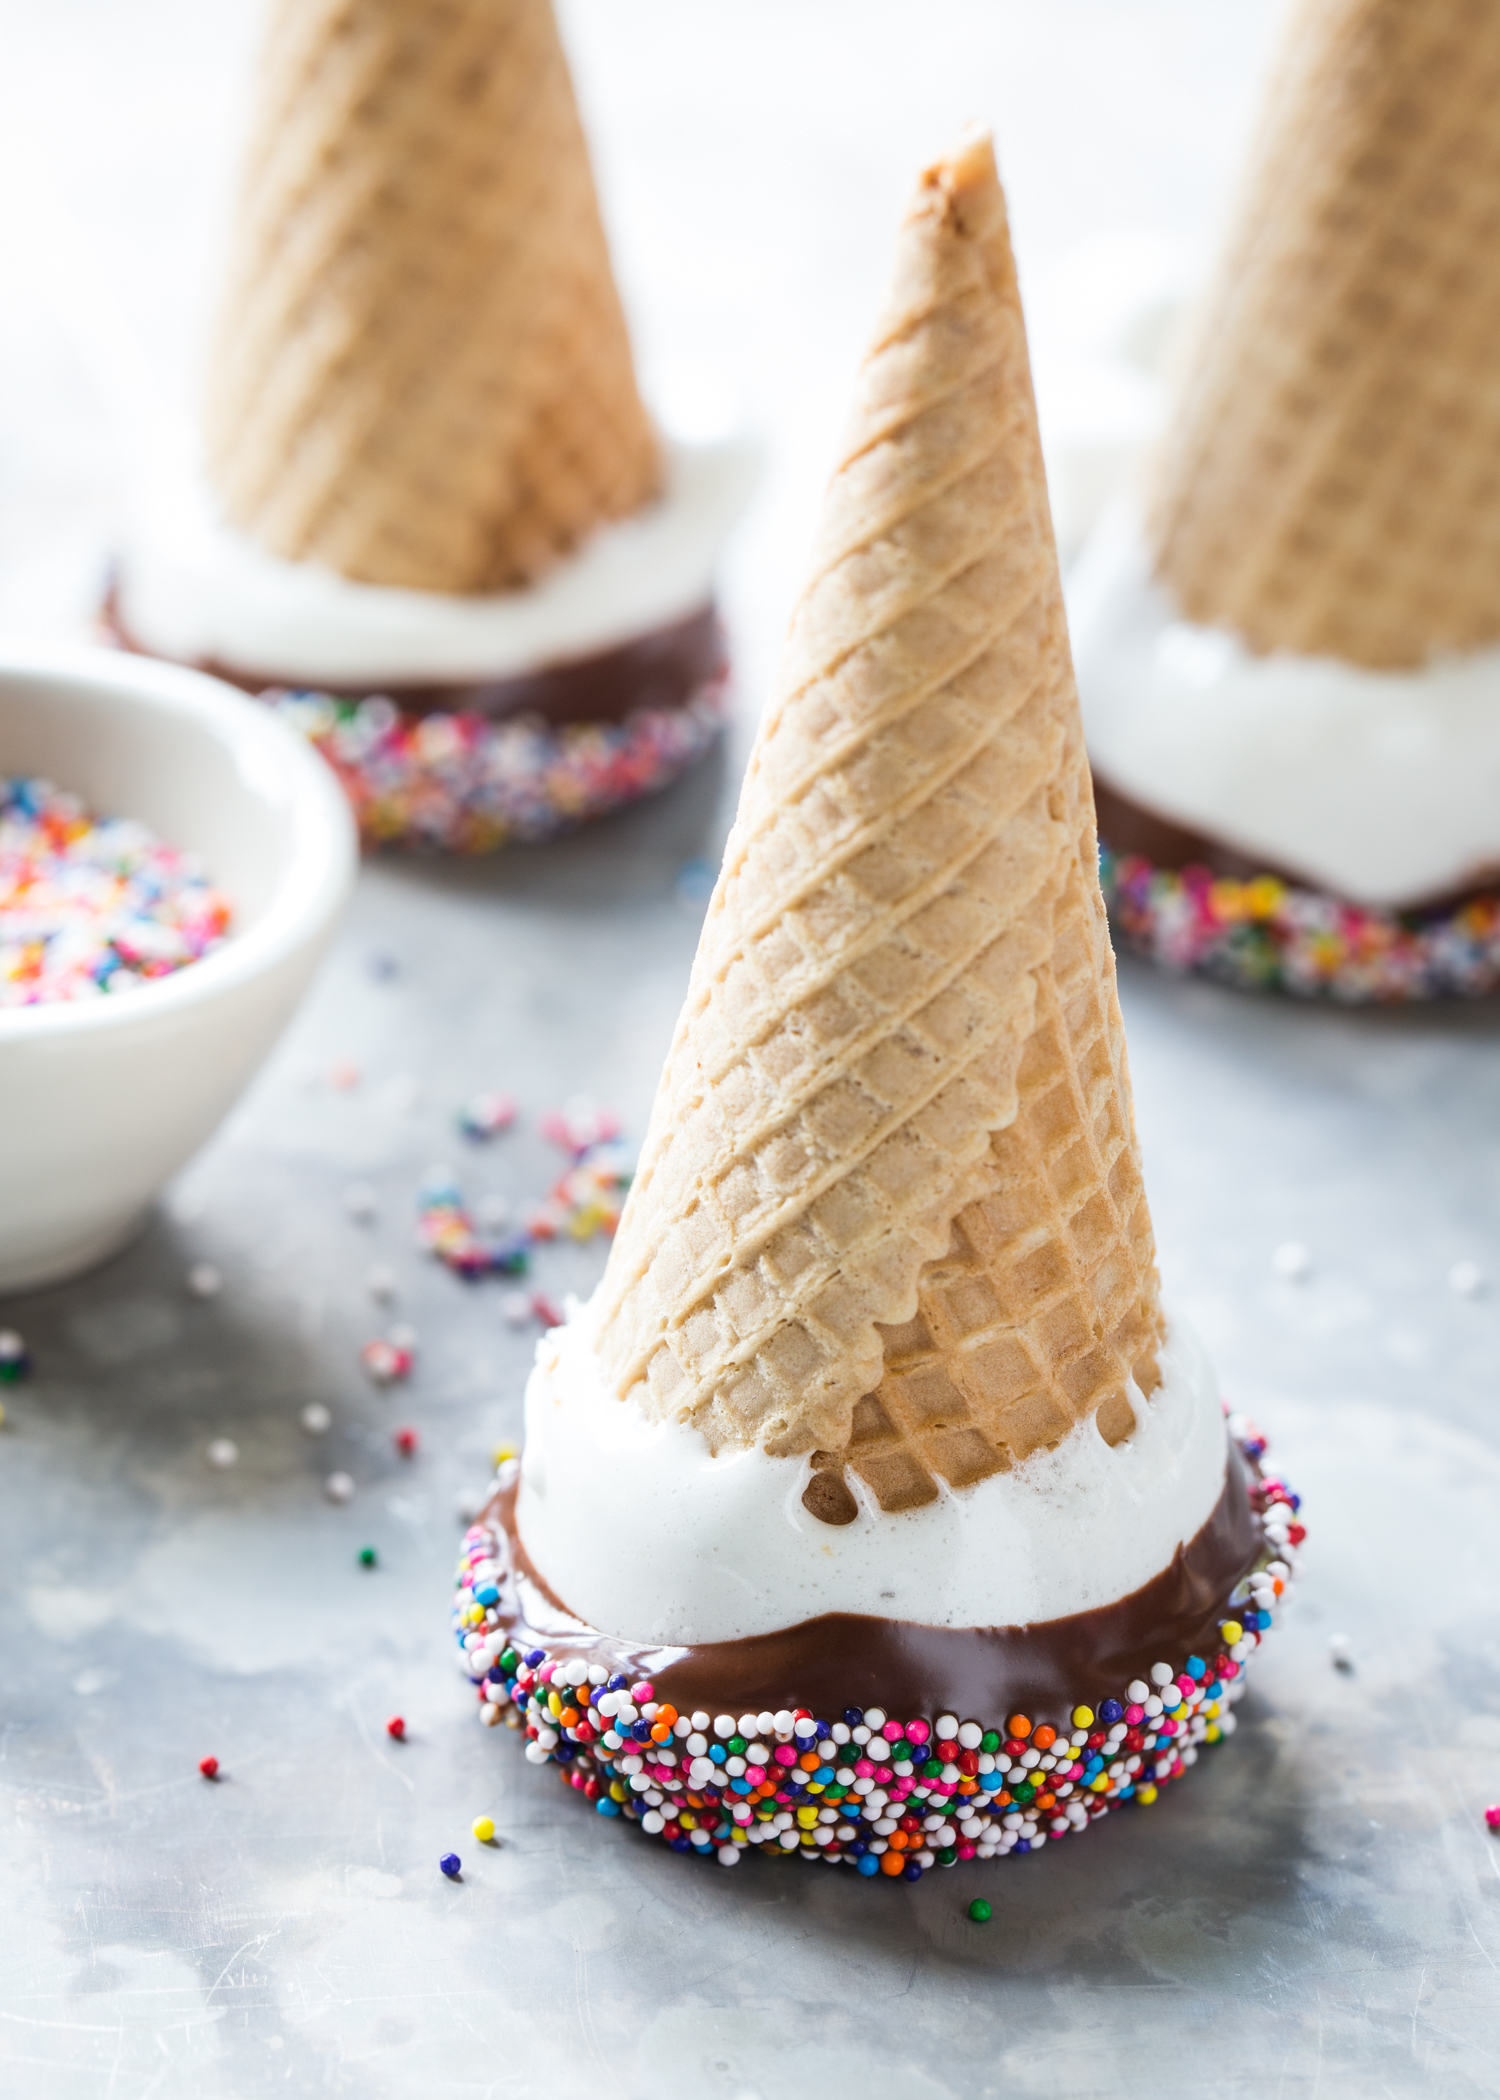 marshmallow dipped ice cream cones are a summer must-have!